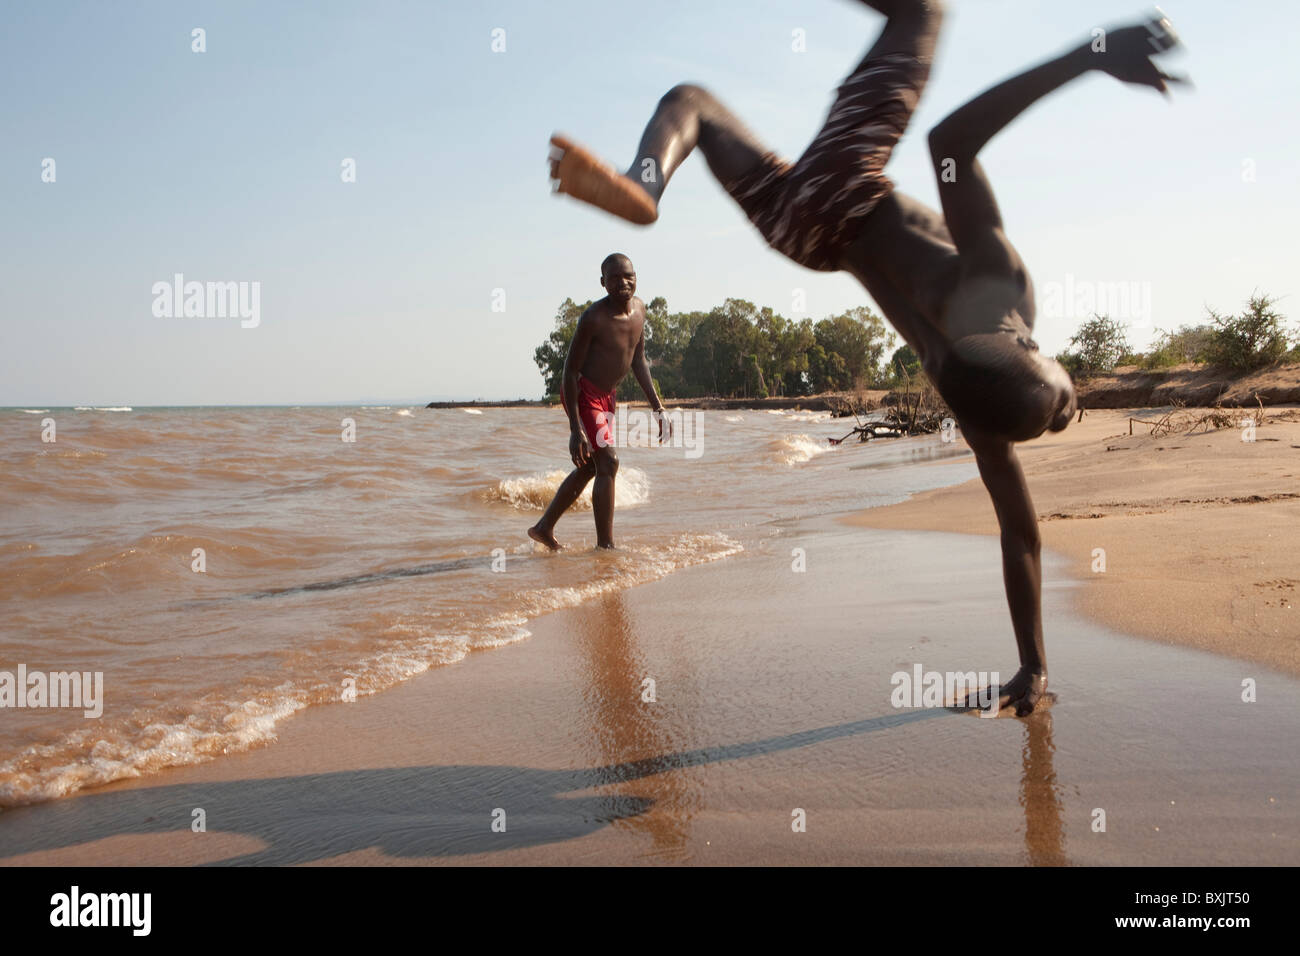 Youths exercise on the shores of Lake Malawi near the town of Karonga, Malawi in Southern Africa. Stock Photo